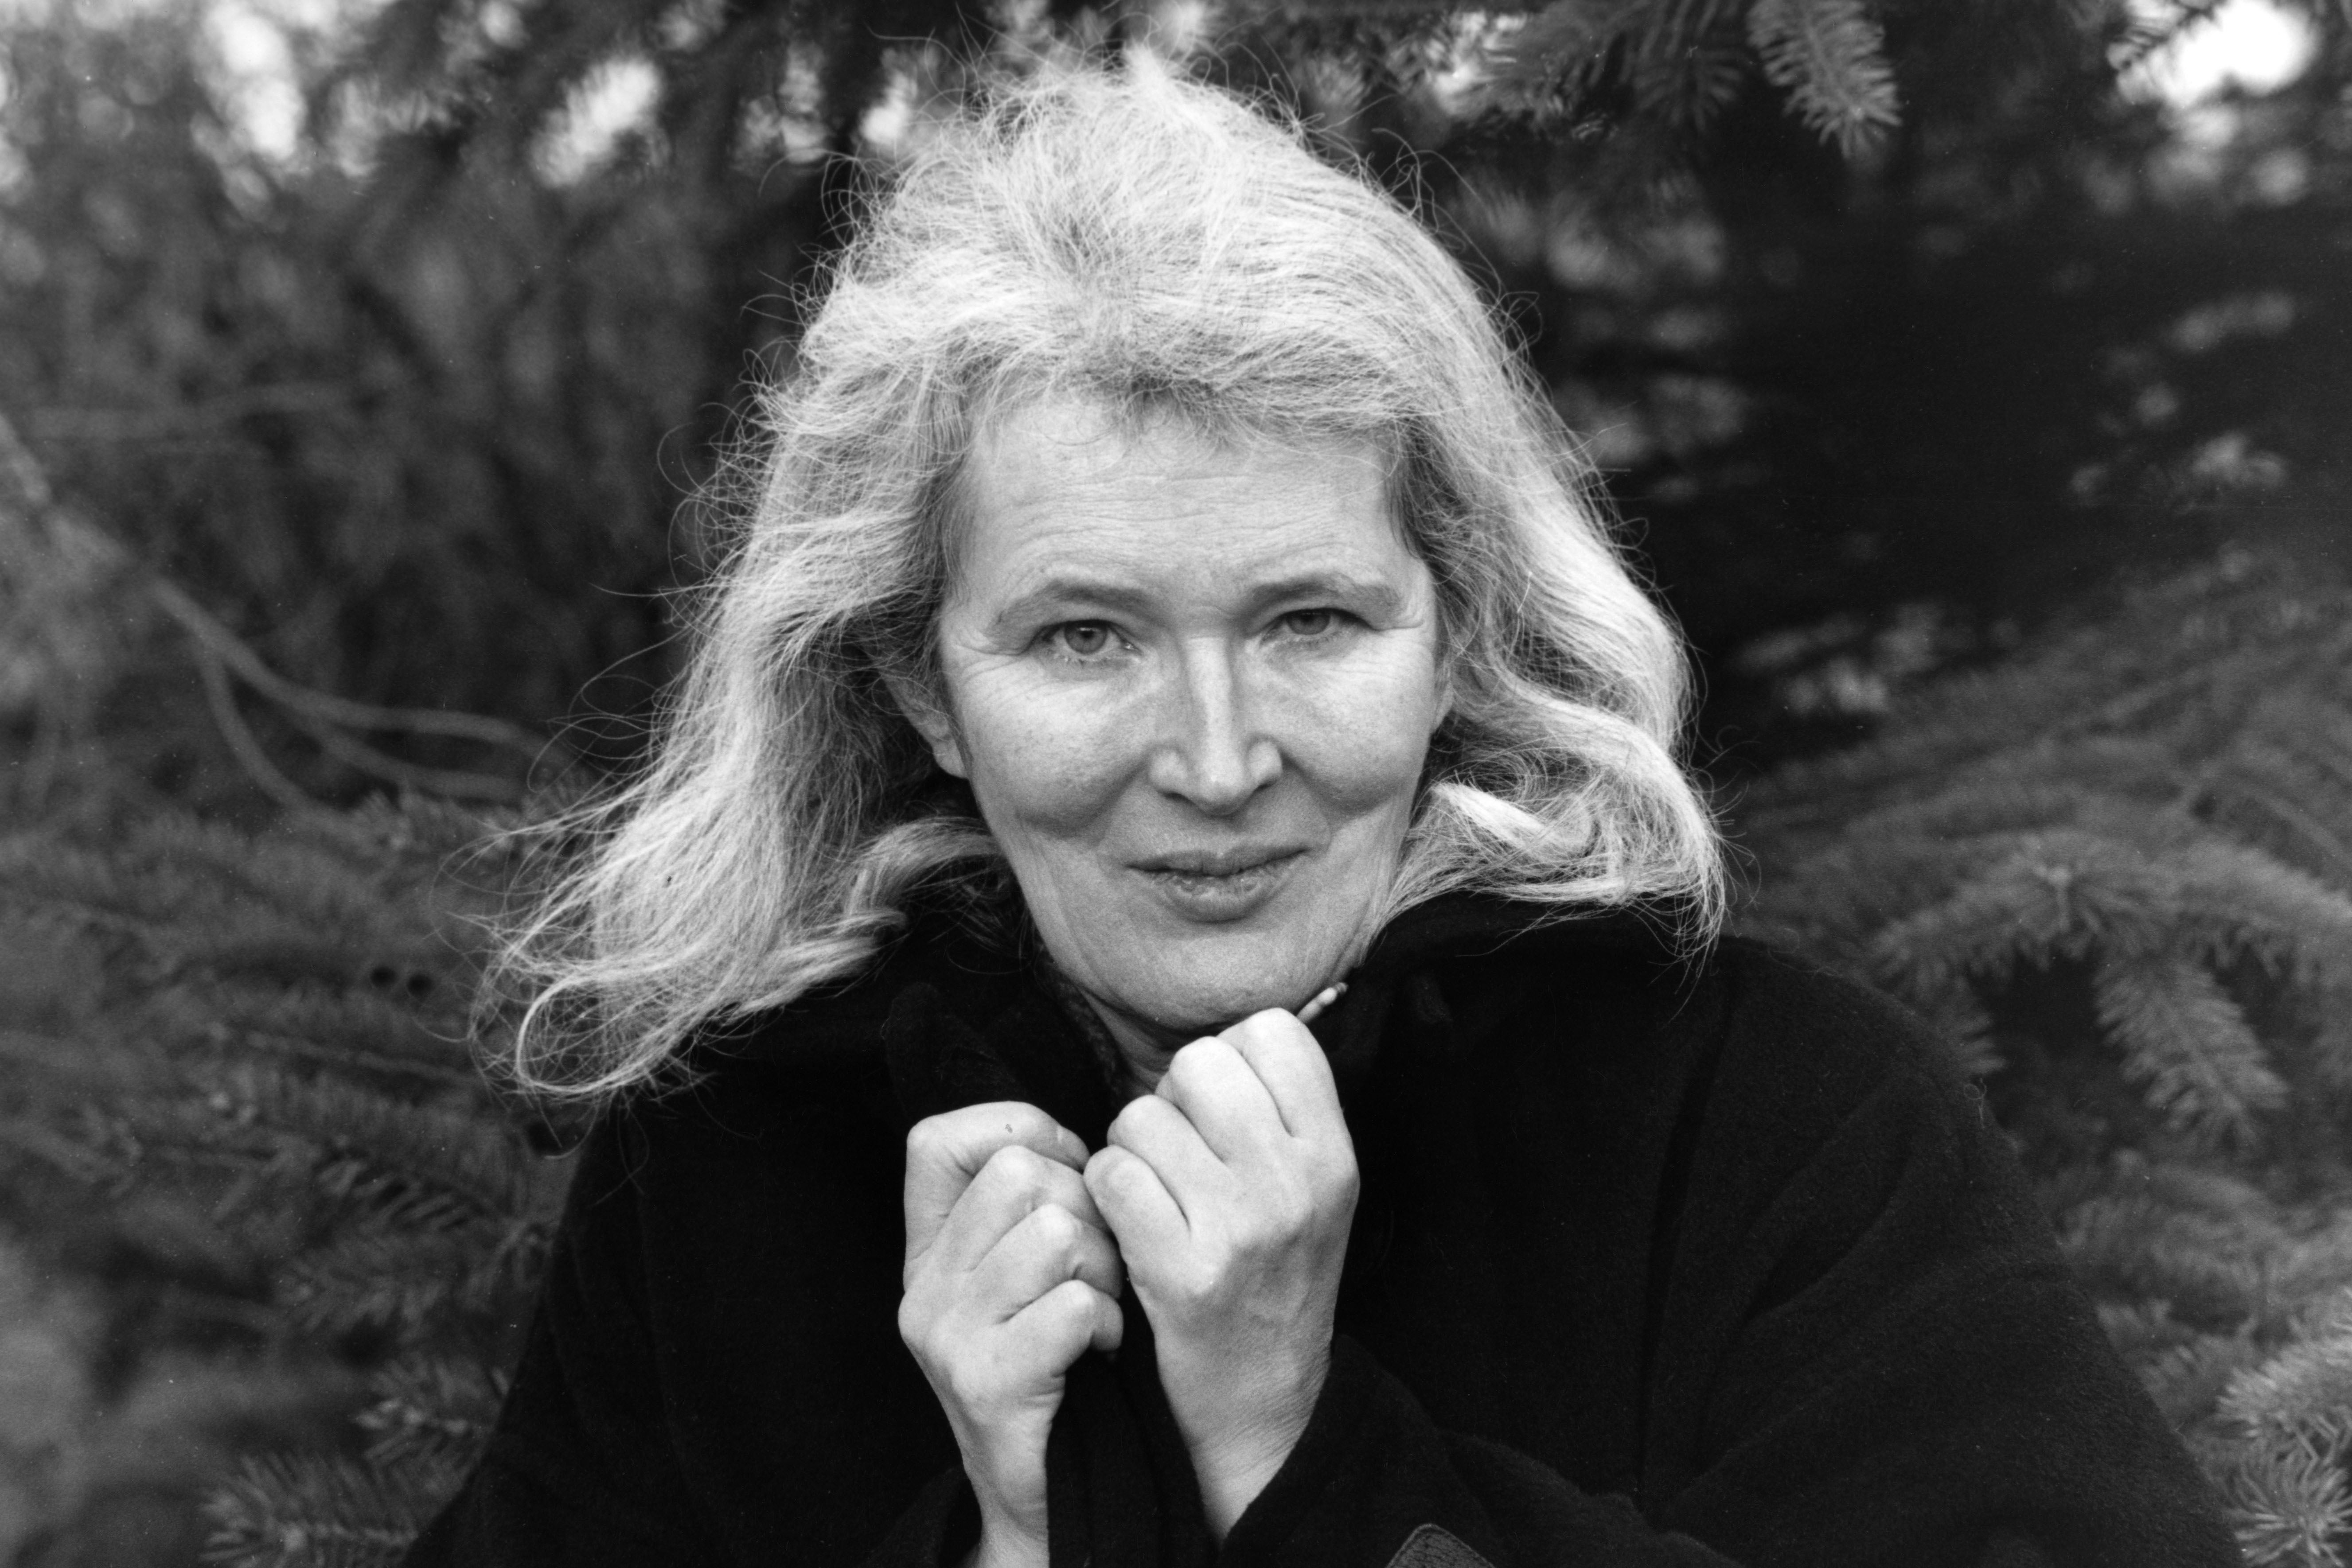 Angela Carter wrote with dashing erudition and explosive force on an extremely wide range of subjects